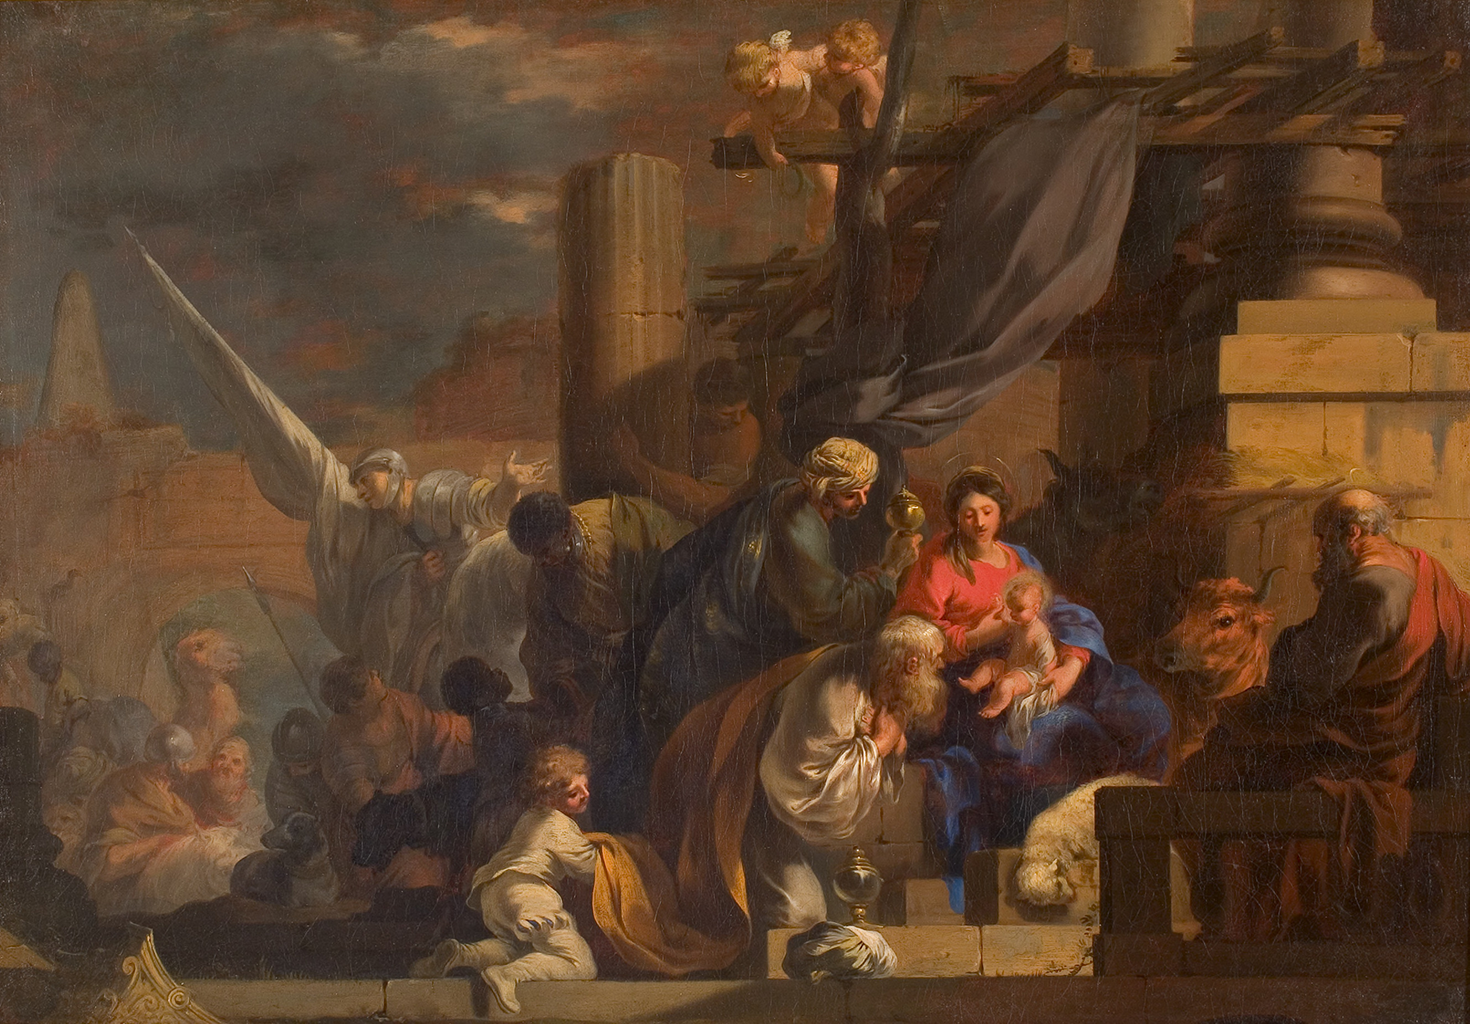 A painting of a large group of people sitting and standing on the steps of a ruin with broken pillars. A man with gray hair kneels and has his eyes fixated on the baby that is sitting on a woman’s lap. Above them are babies with small white wings. In the background is a man wearing metal armor and leaning against a large white cloth wrapped around a pole.